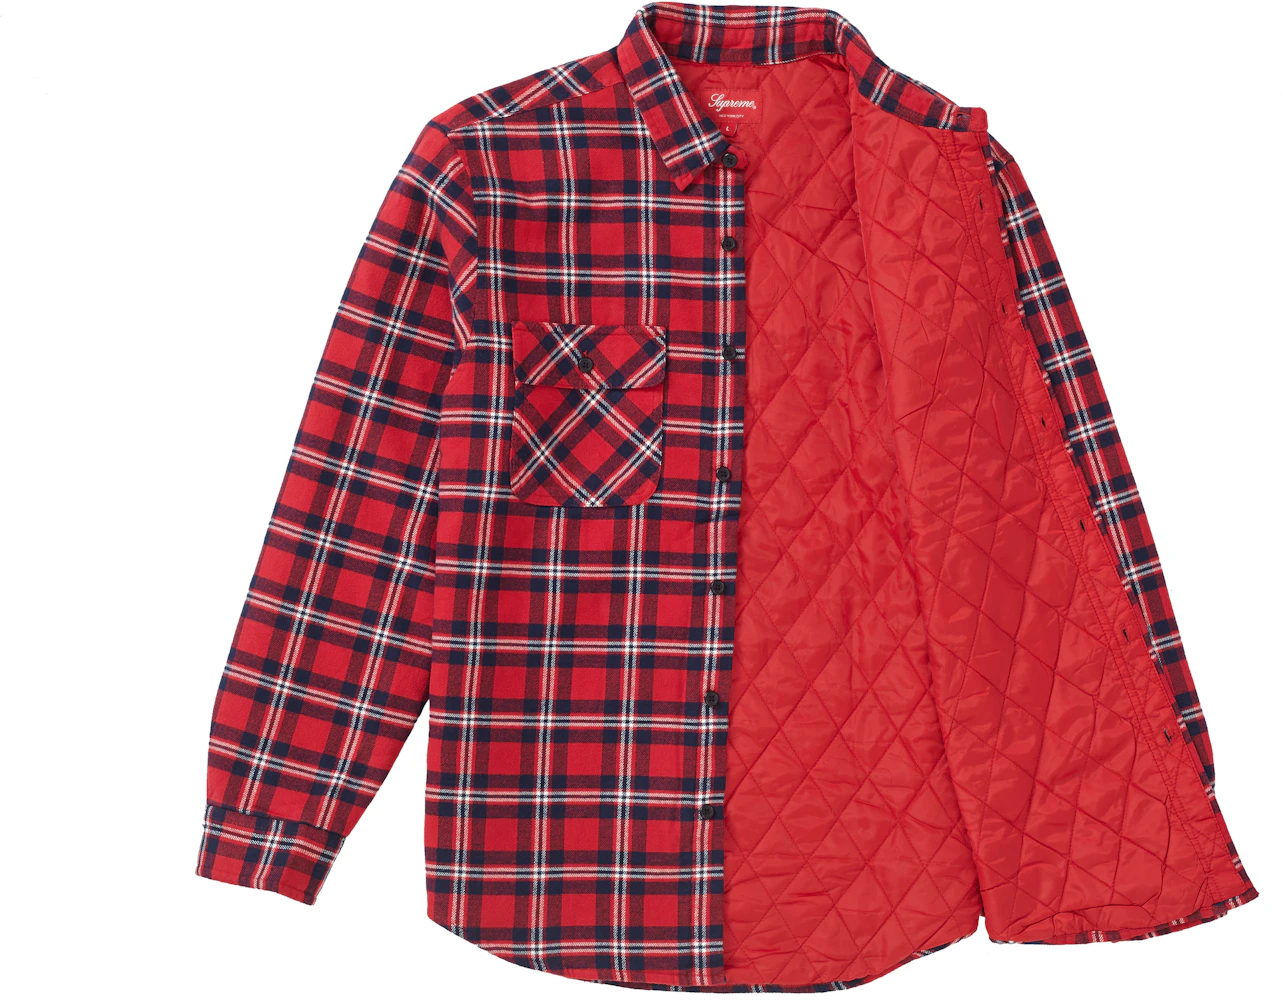 The Quilted Plaid Flannel - Red Baron